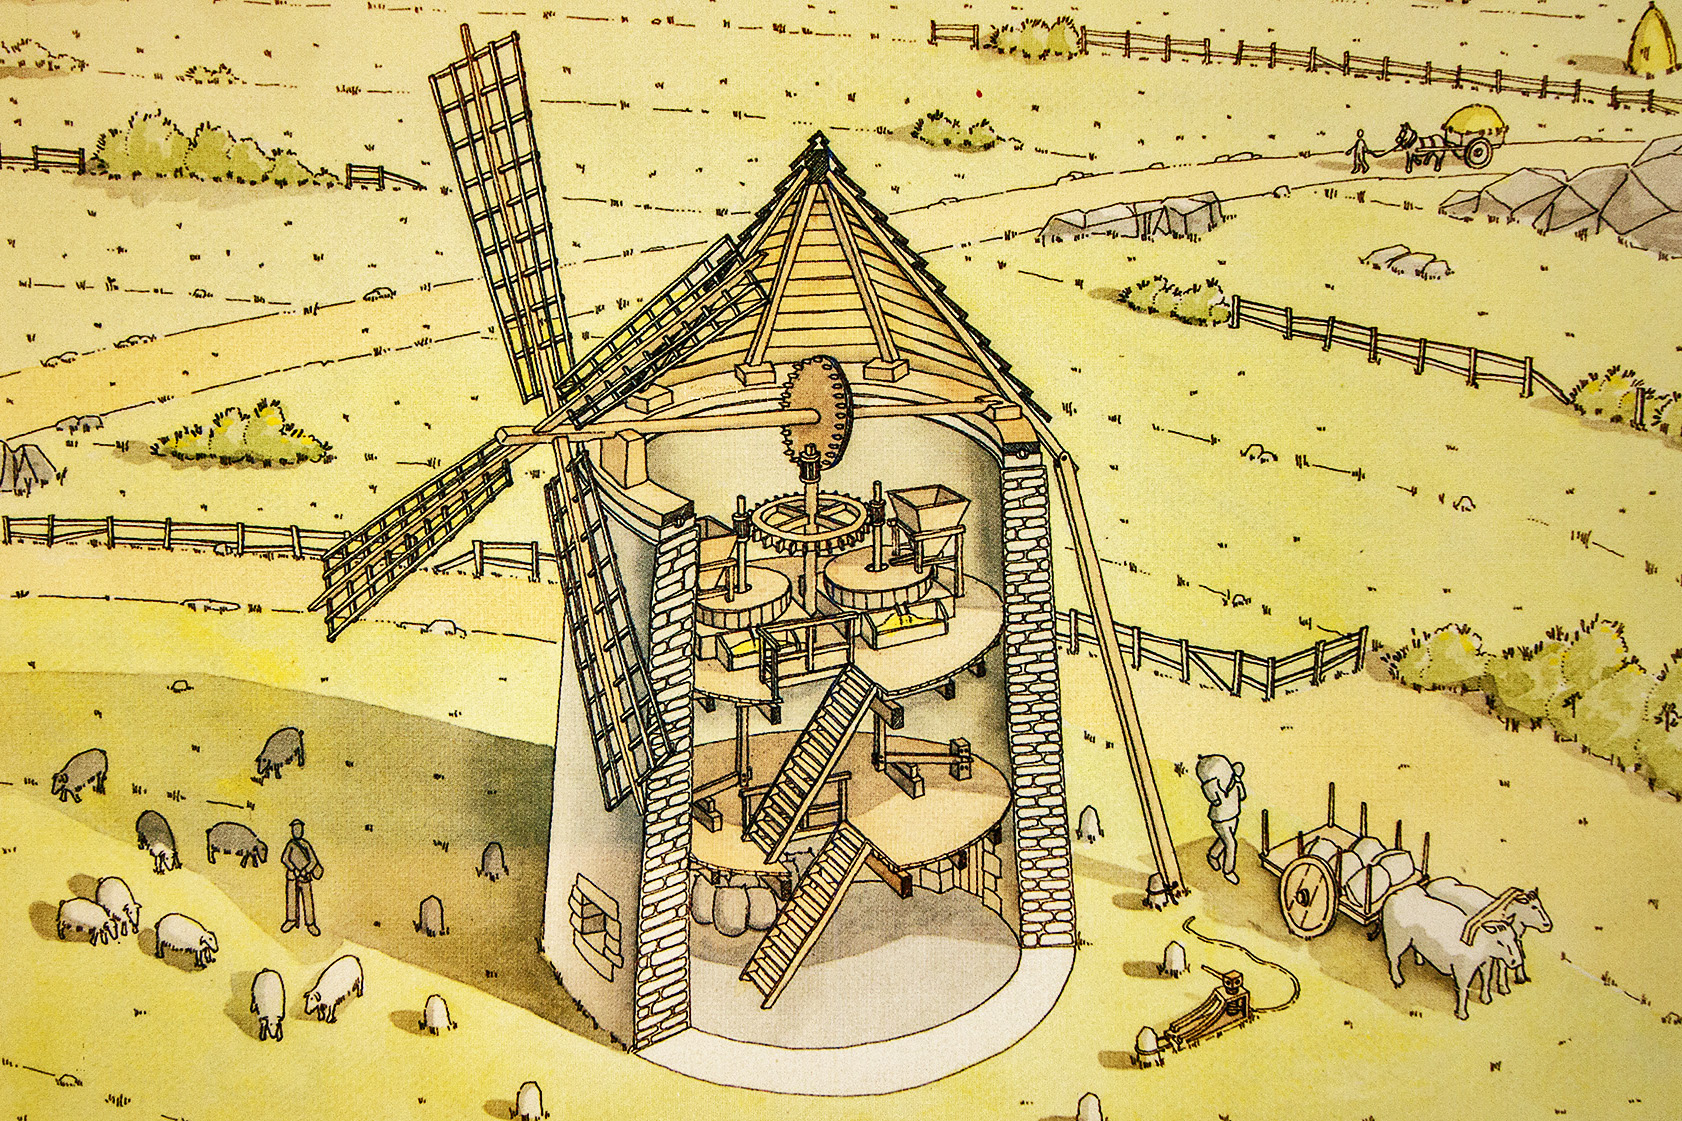 Cross section of a typical windmill in Bizkaia. Drawing by Eduardo Cordero and Ramón Higuera